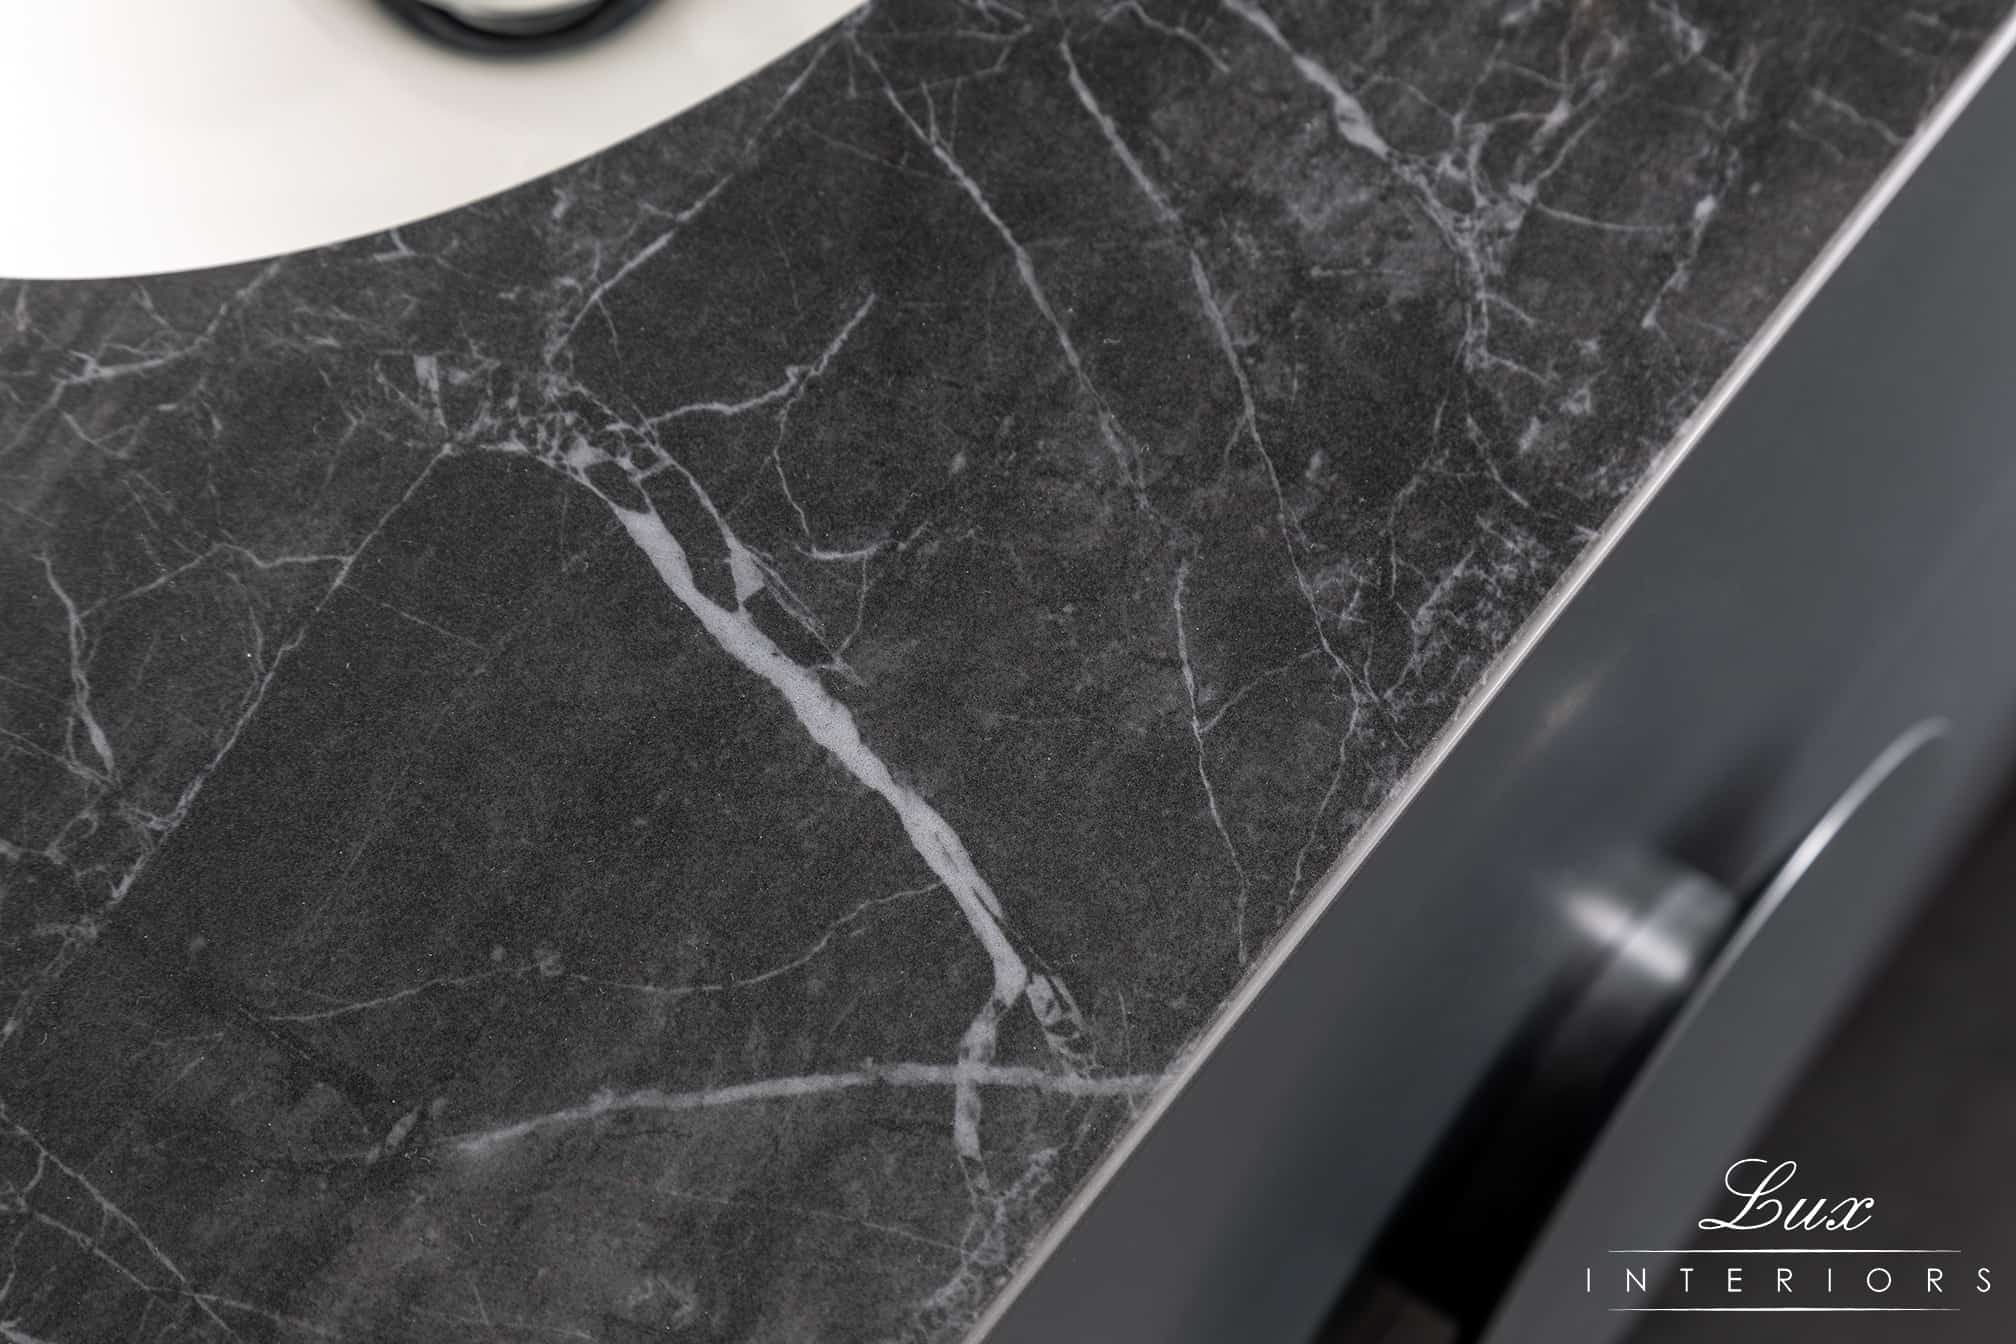 A photo of a black marble bench top.